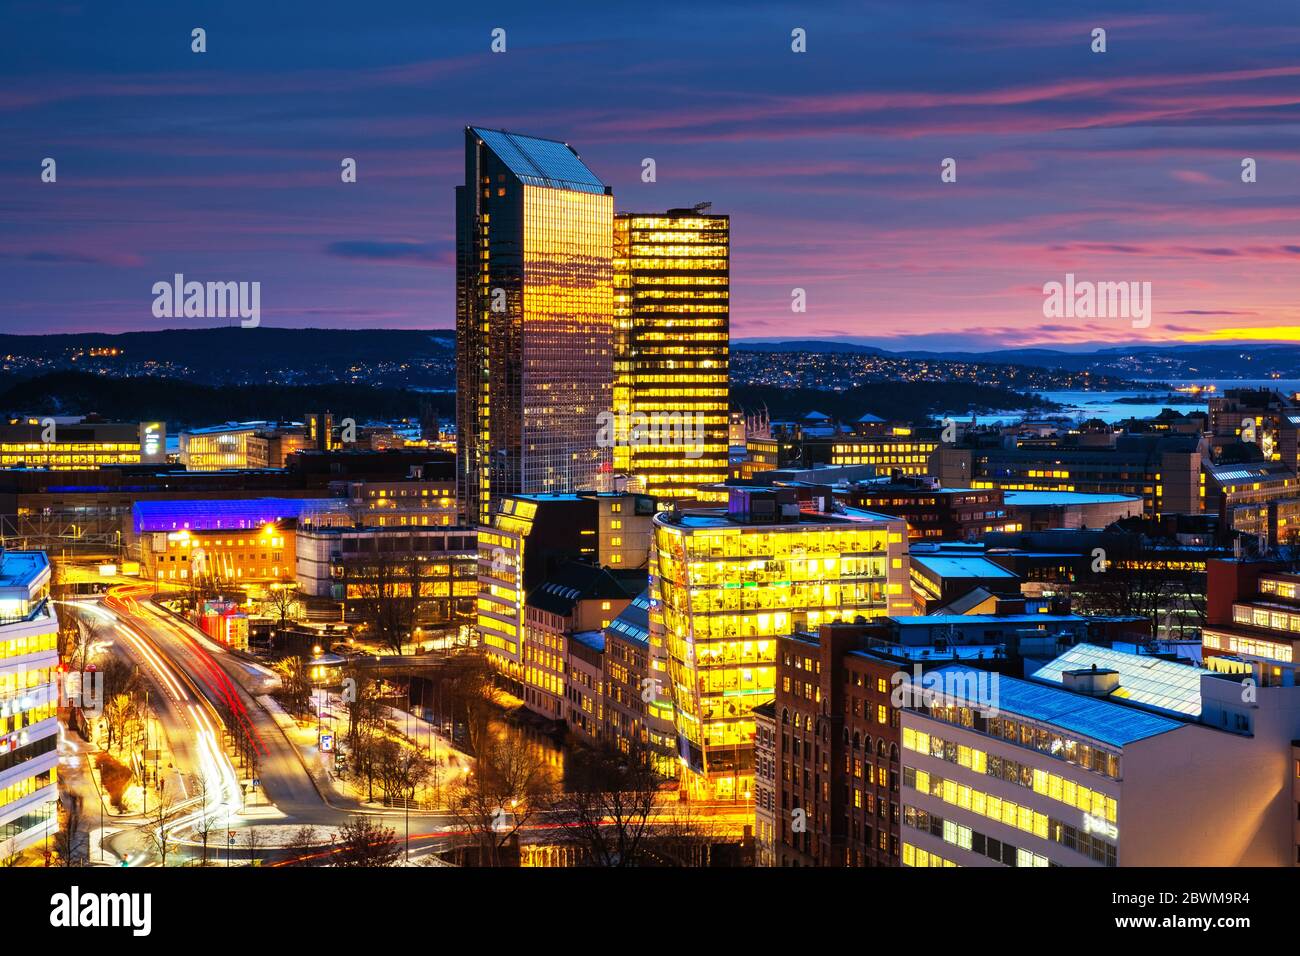 Oslo, Norway. A night view of Sentrum area of Oslo, Norway, with modern and historical buildings and car traffic. Sunset colorful sky in winter with s Stock Photo